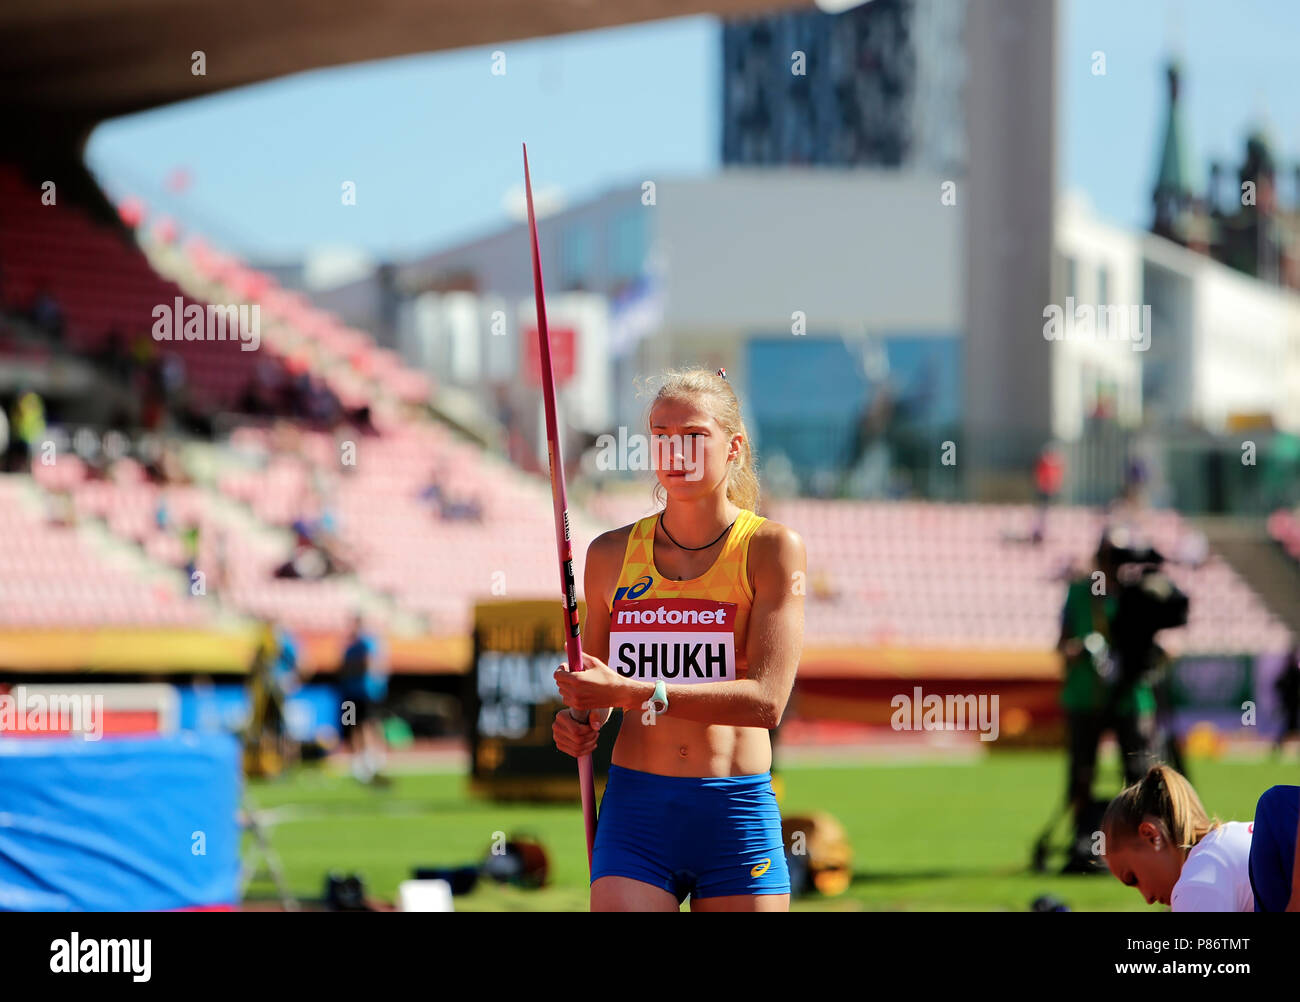 Tampere, Finland. 10th July, 2018. Alina Shukh (Ukraine) compite in javeline throw in Tampere, Finland 10th July, 2018. The IAAF World U20 Championships be held in on July 10-15, 2018. Credit: Denys Kuvaiev /Alamy Live News Credit: Denys Kuvaiev/Alamy Live News Stock Photo